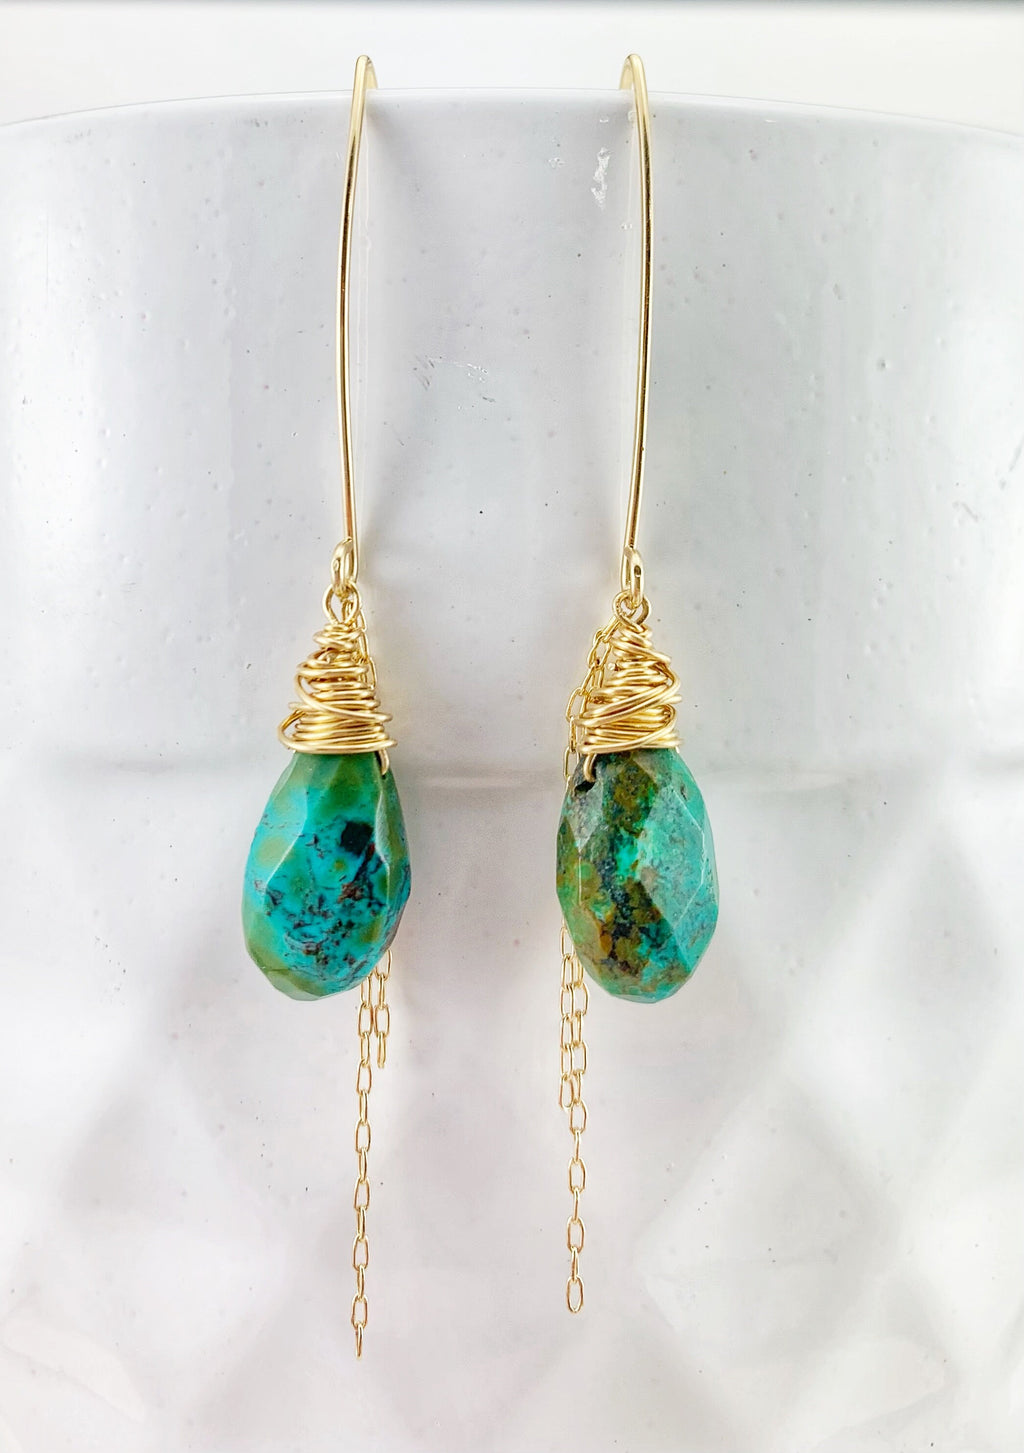 Gold Turquoise Earrings, gold wire wrapped earrings, turquoise drop earrings, boho earrings, turquoise earrings